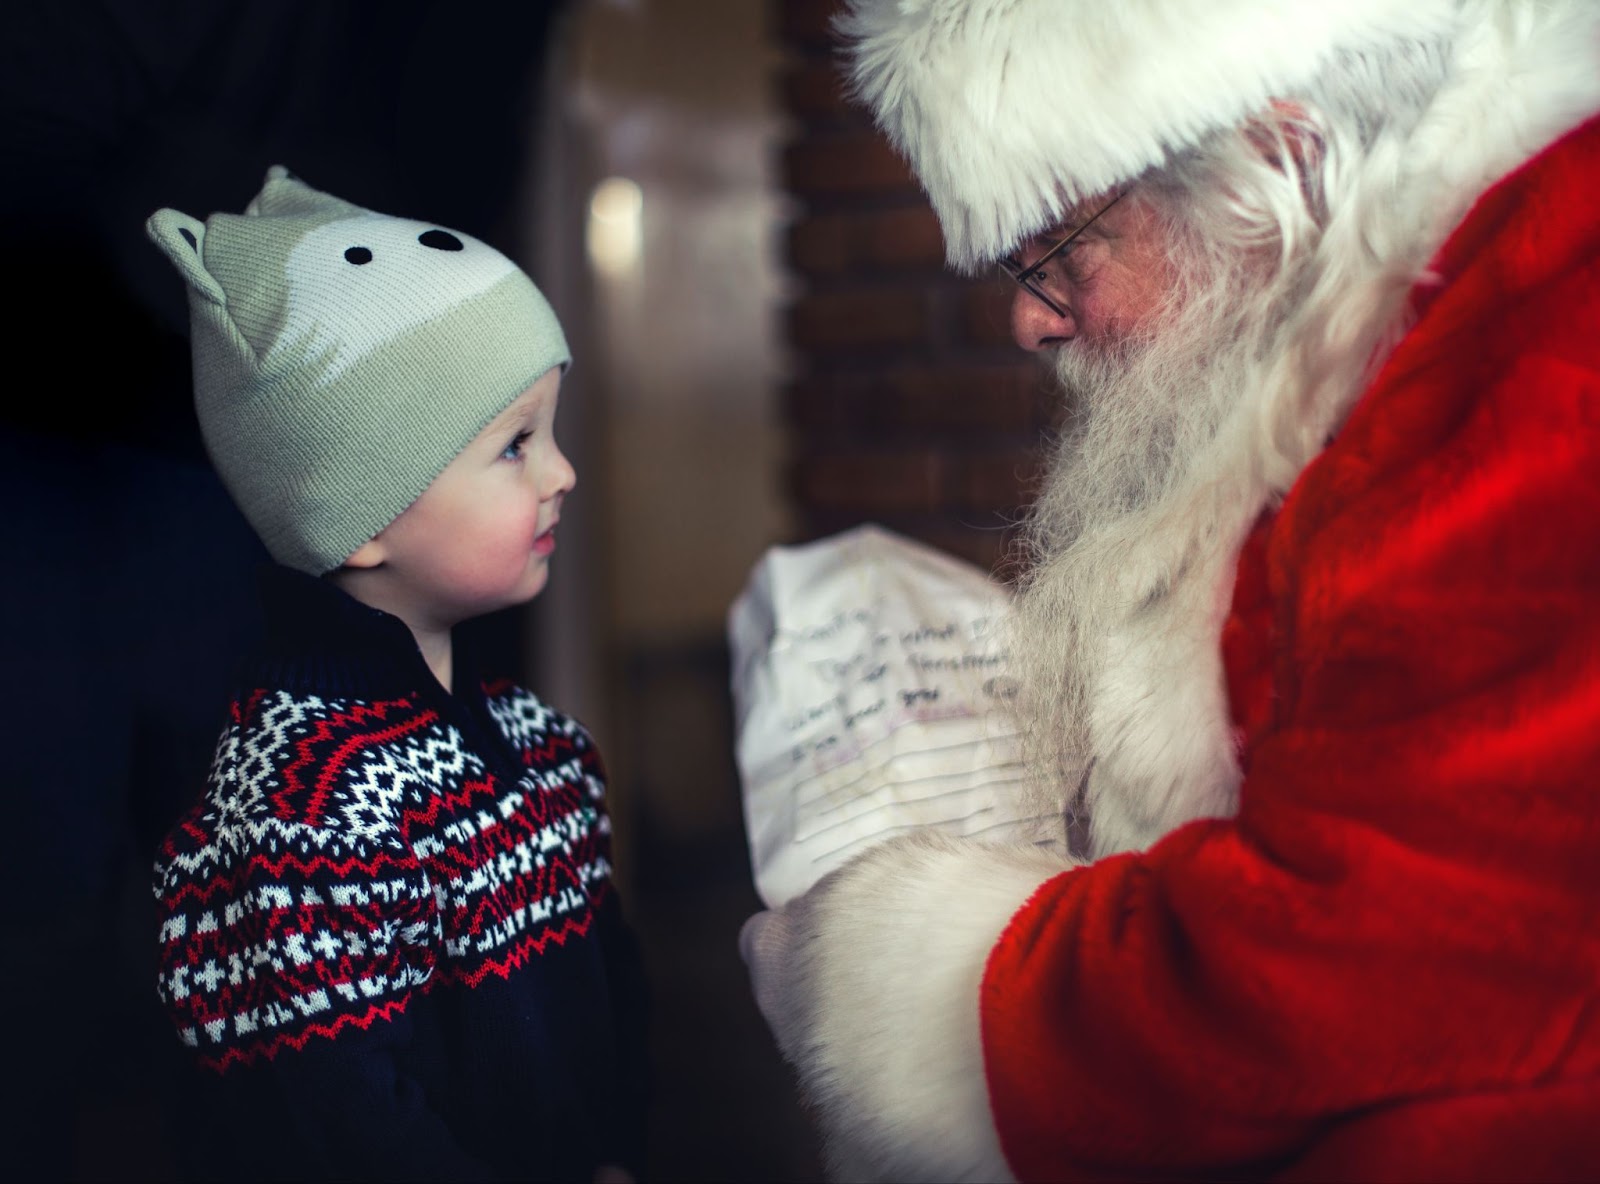 Santa with a list next to young boy in a fox hat and Christmas jumper.